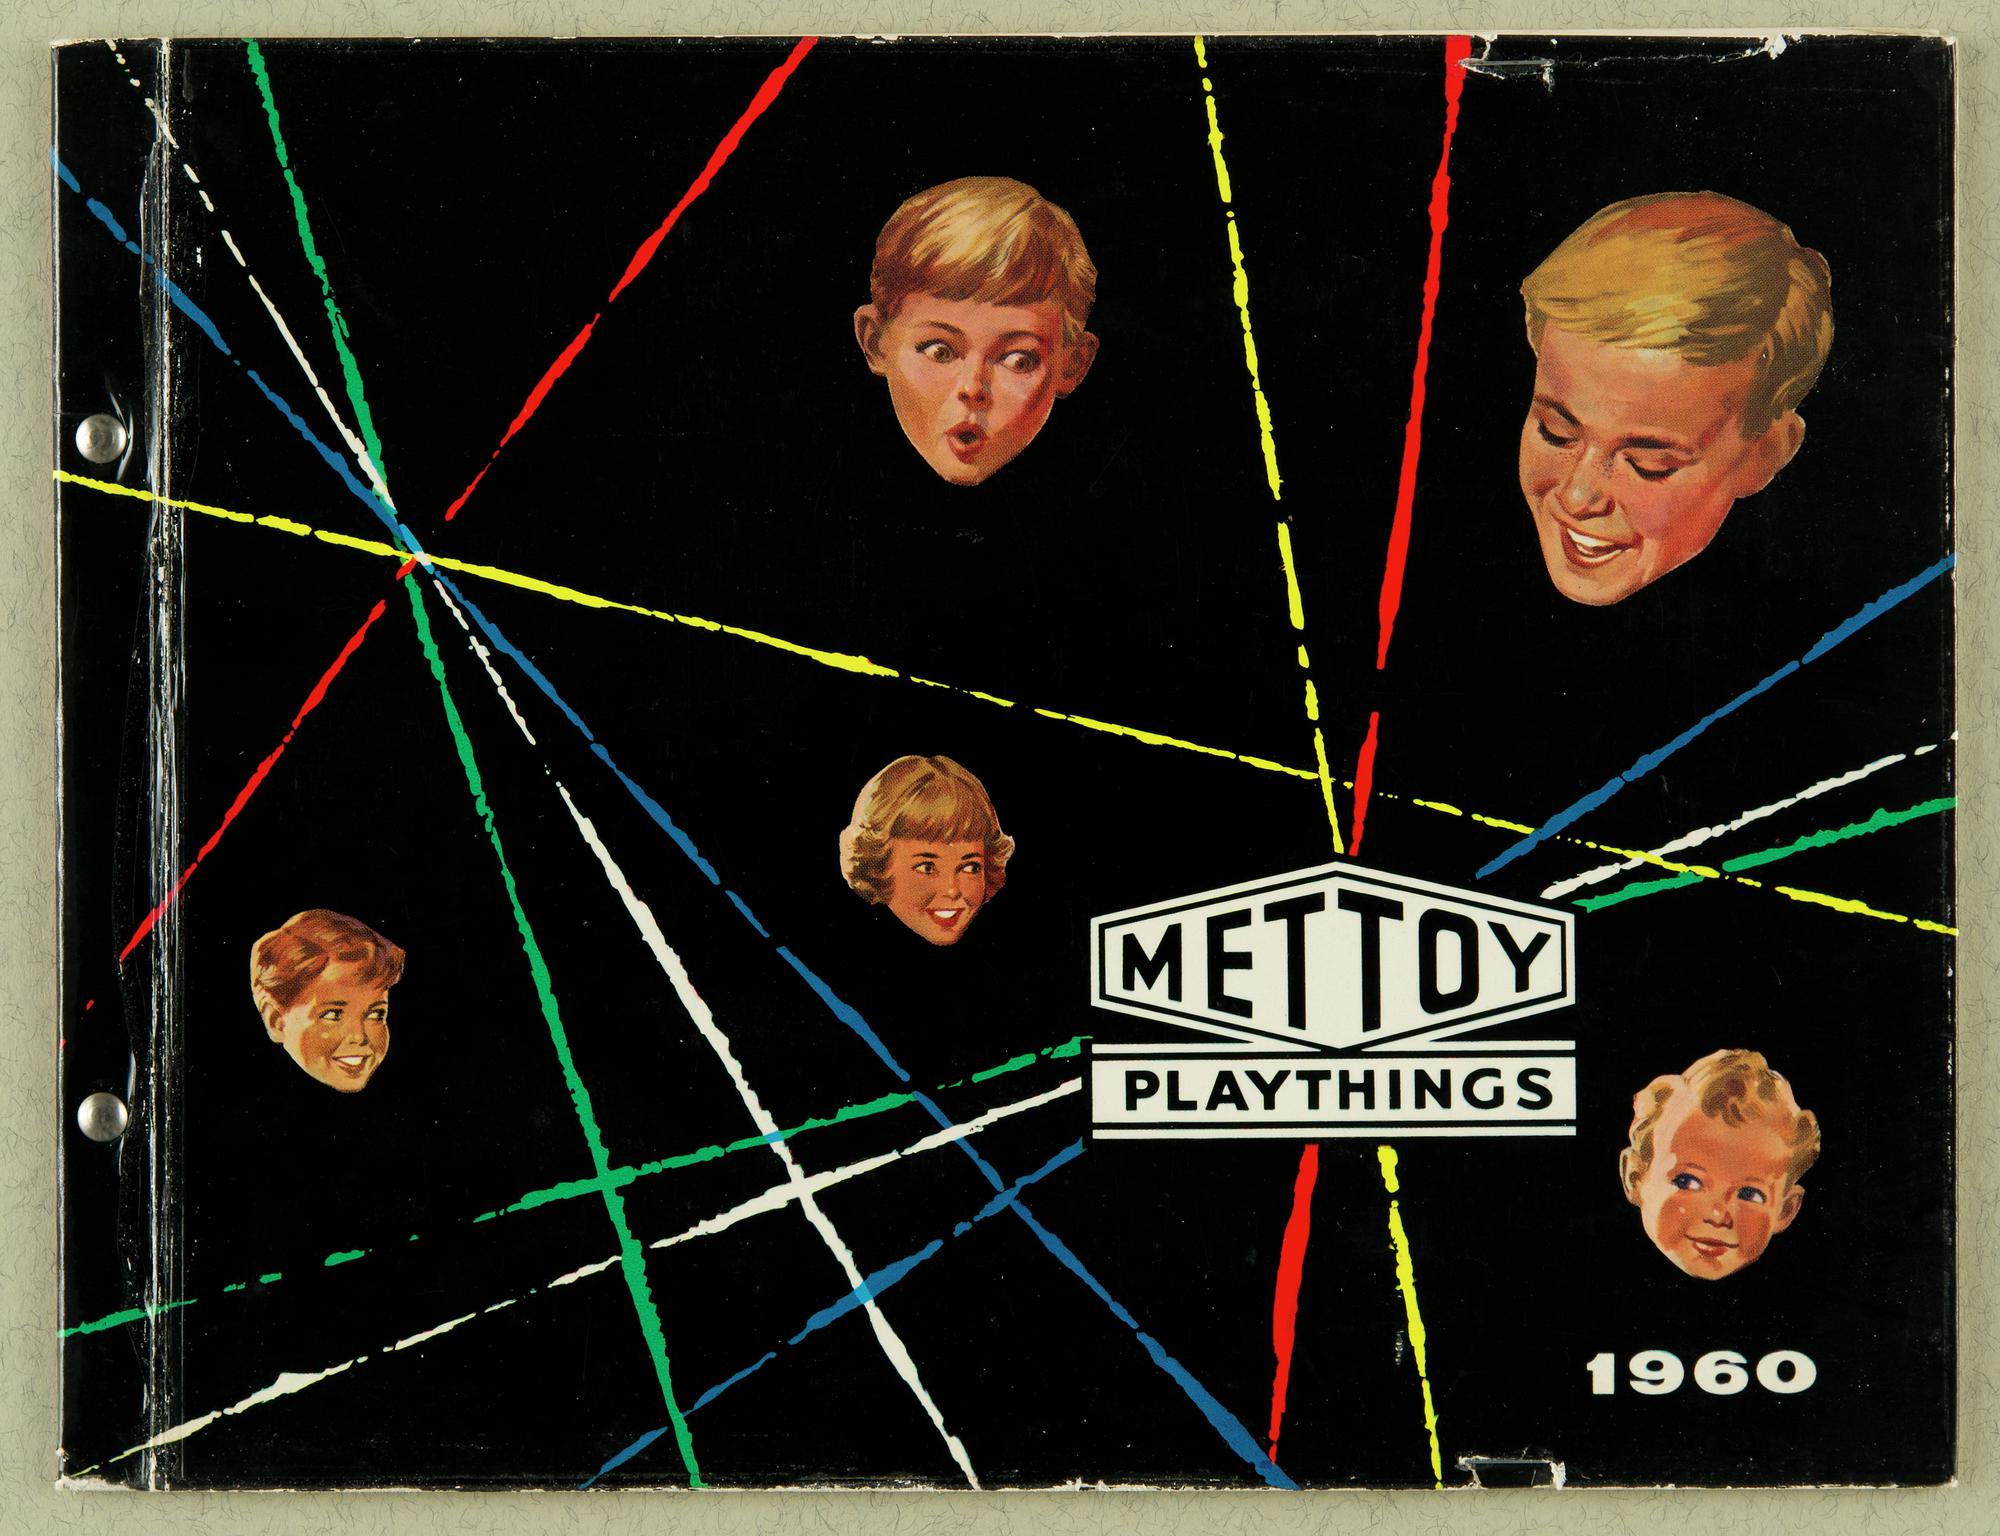 Mettoy Playthings 1960 (catalogue)